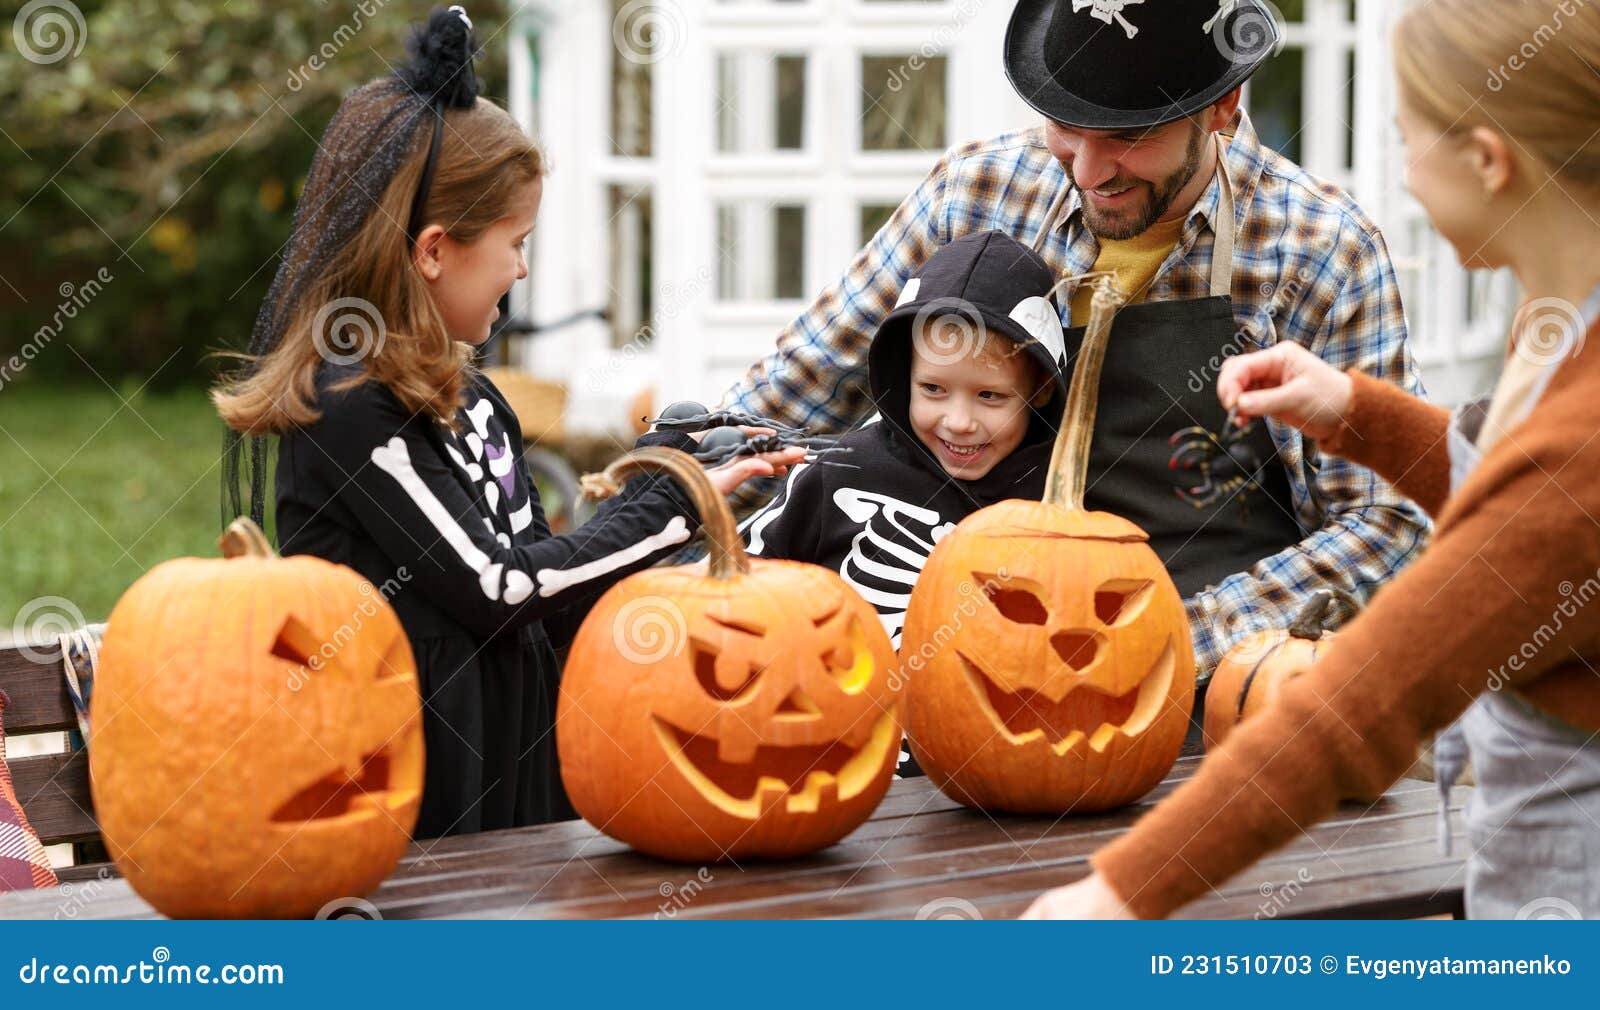 happy young family in halloween costumes carving pumpkins together in backyard